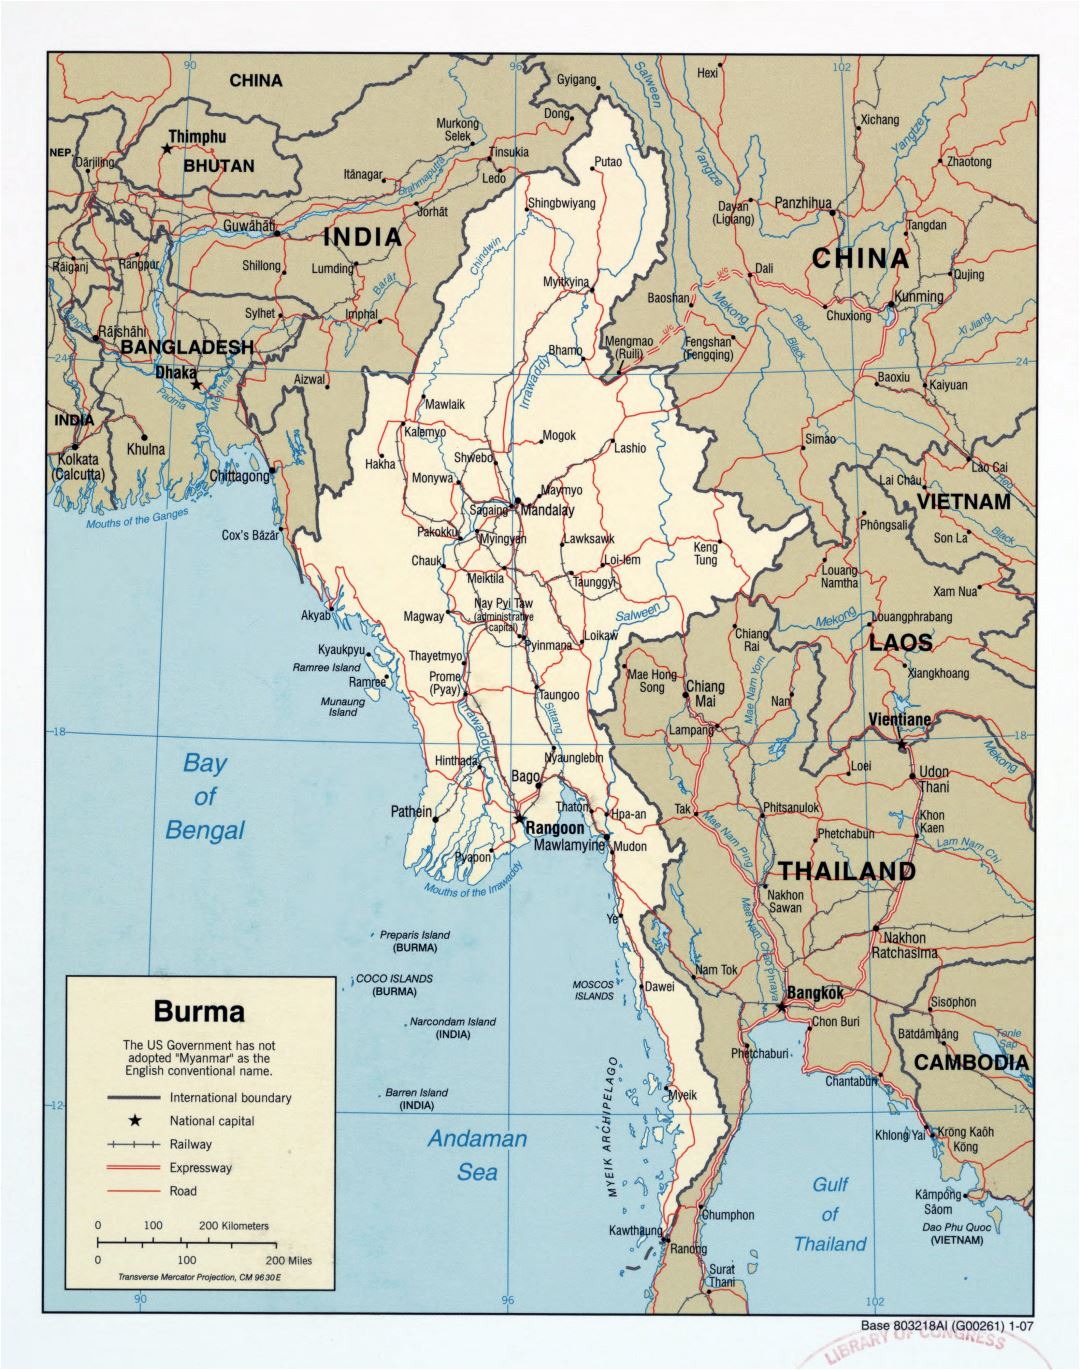 Large scale political map of Burma (Myanmar) with roads, railroads and major cities - 2007